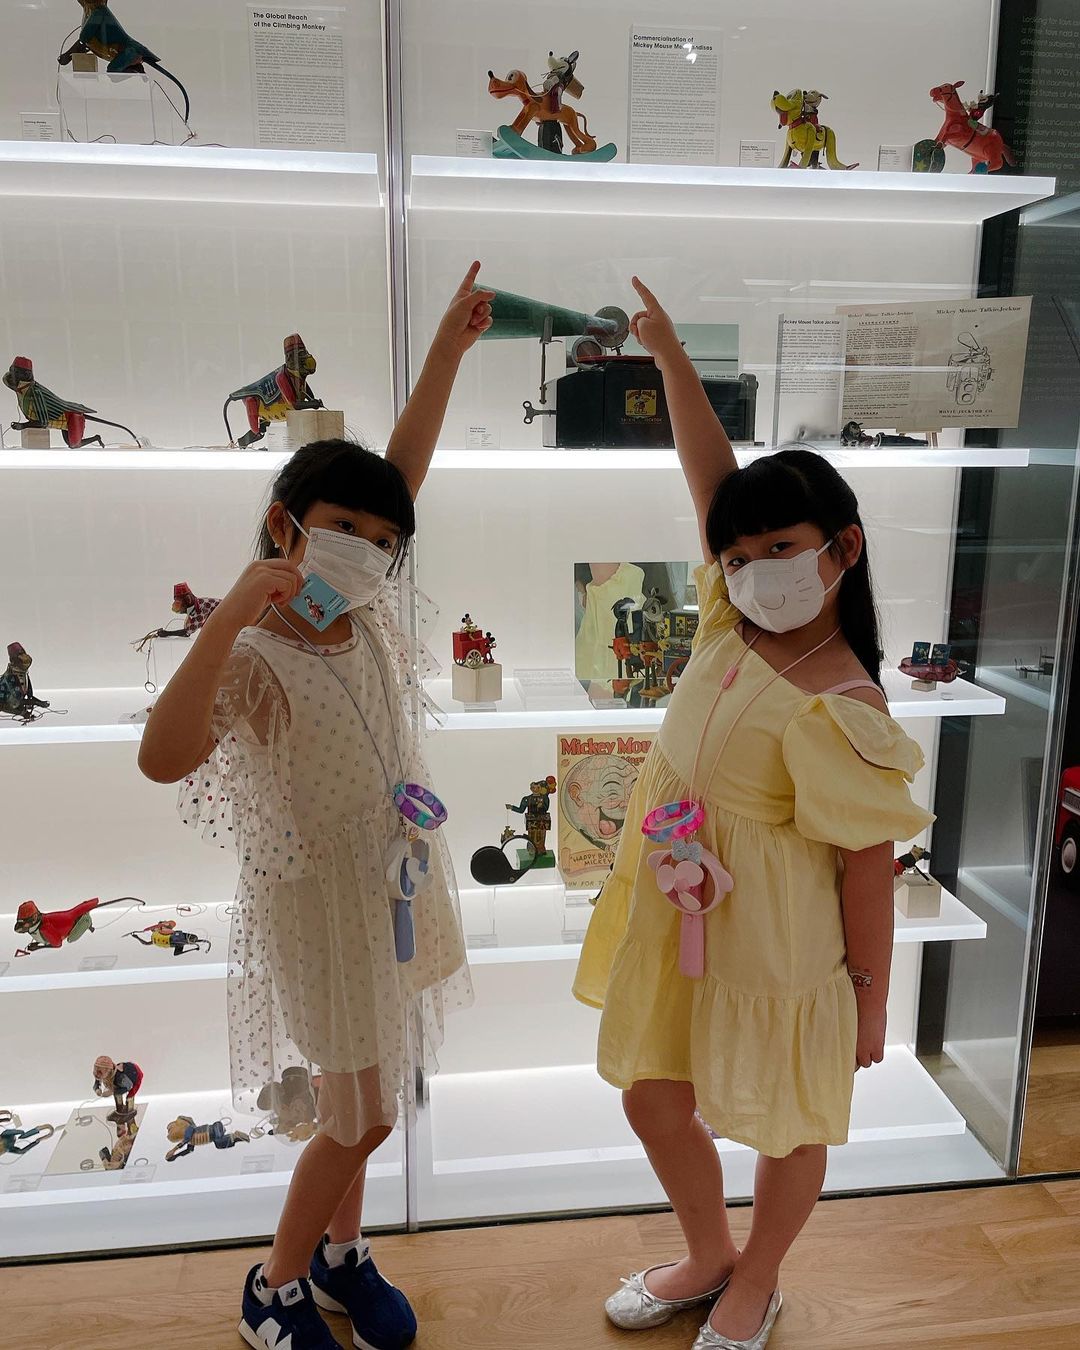 mint museum of toys - children posing with toys